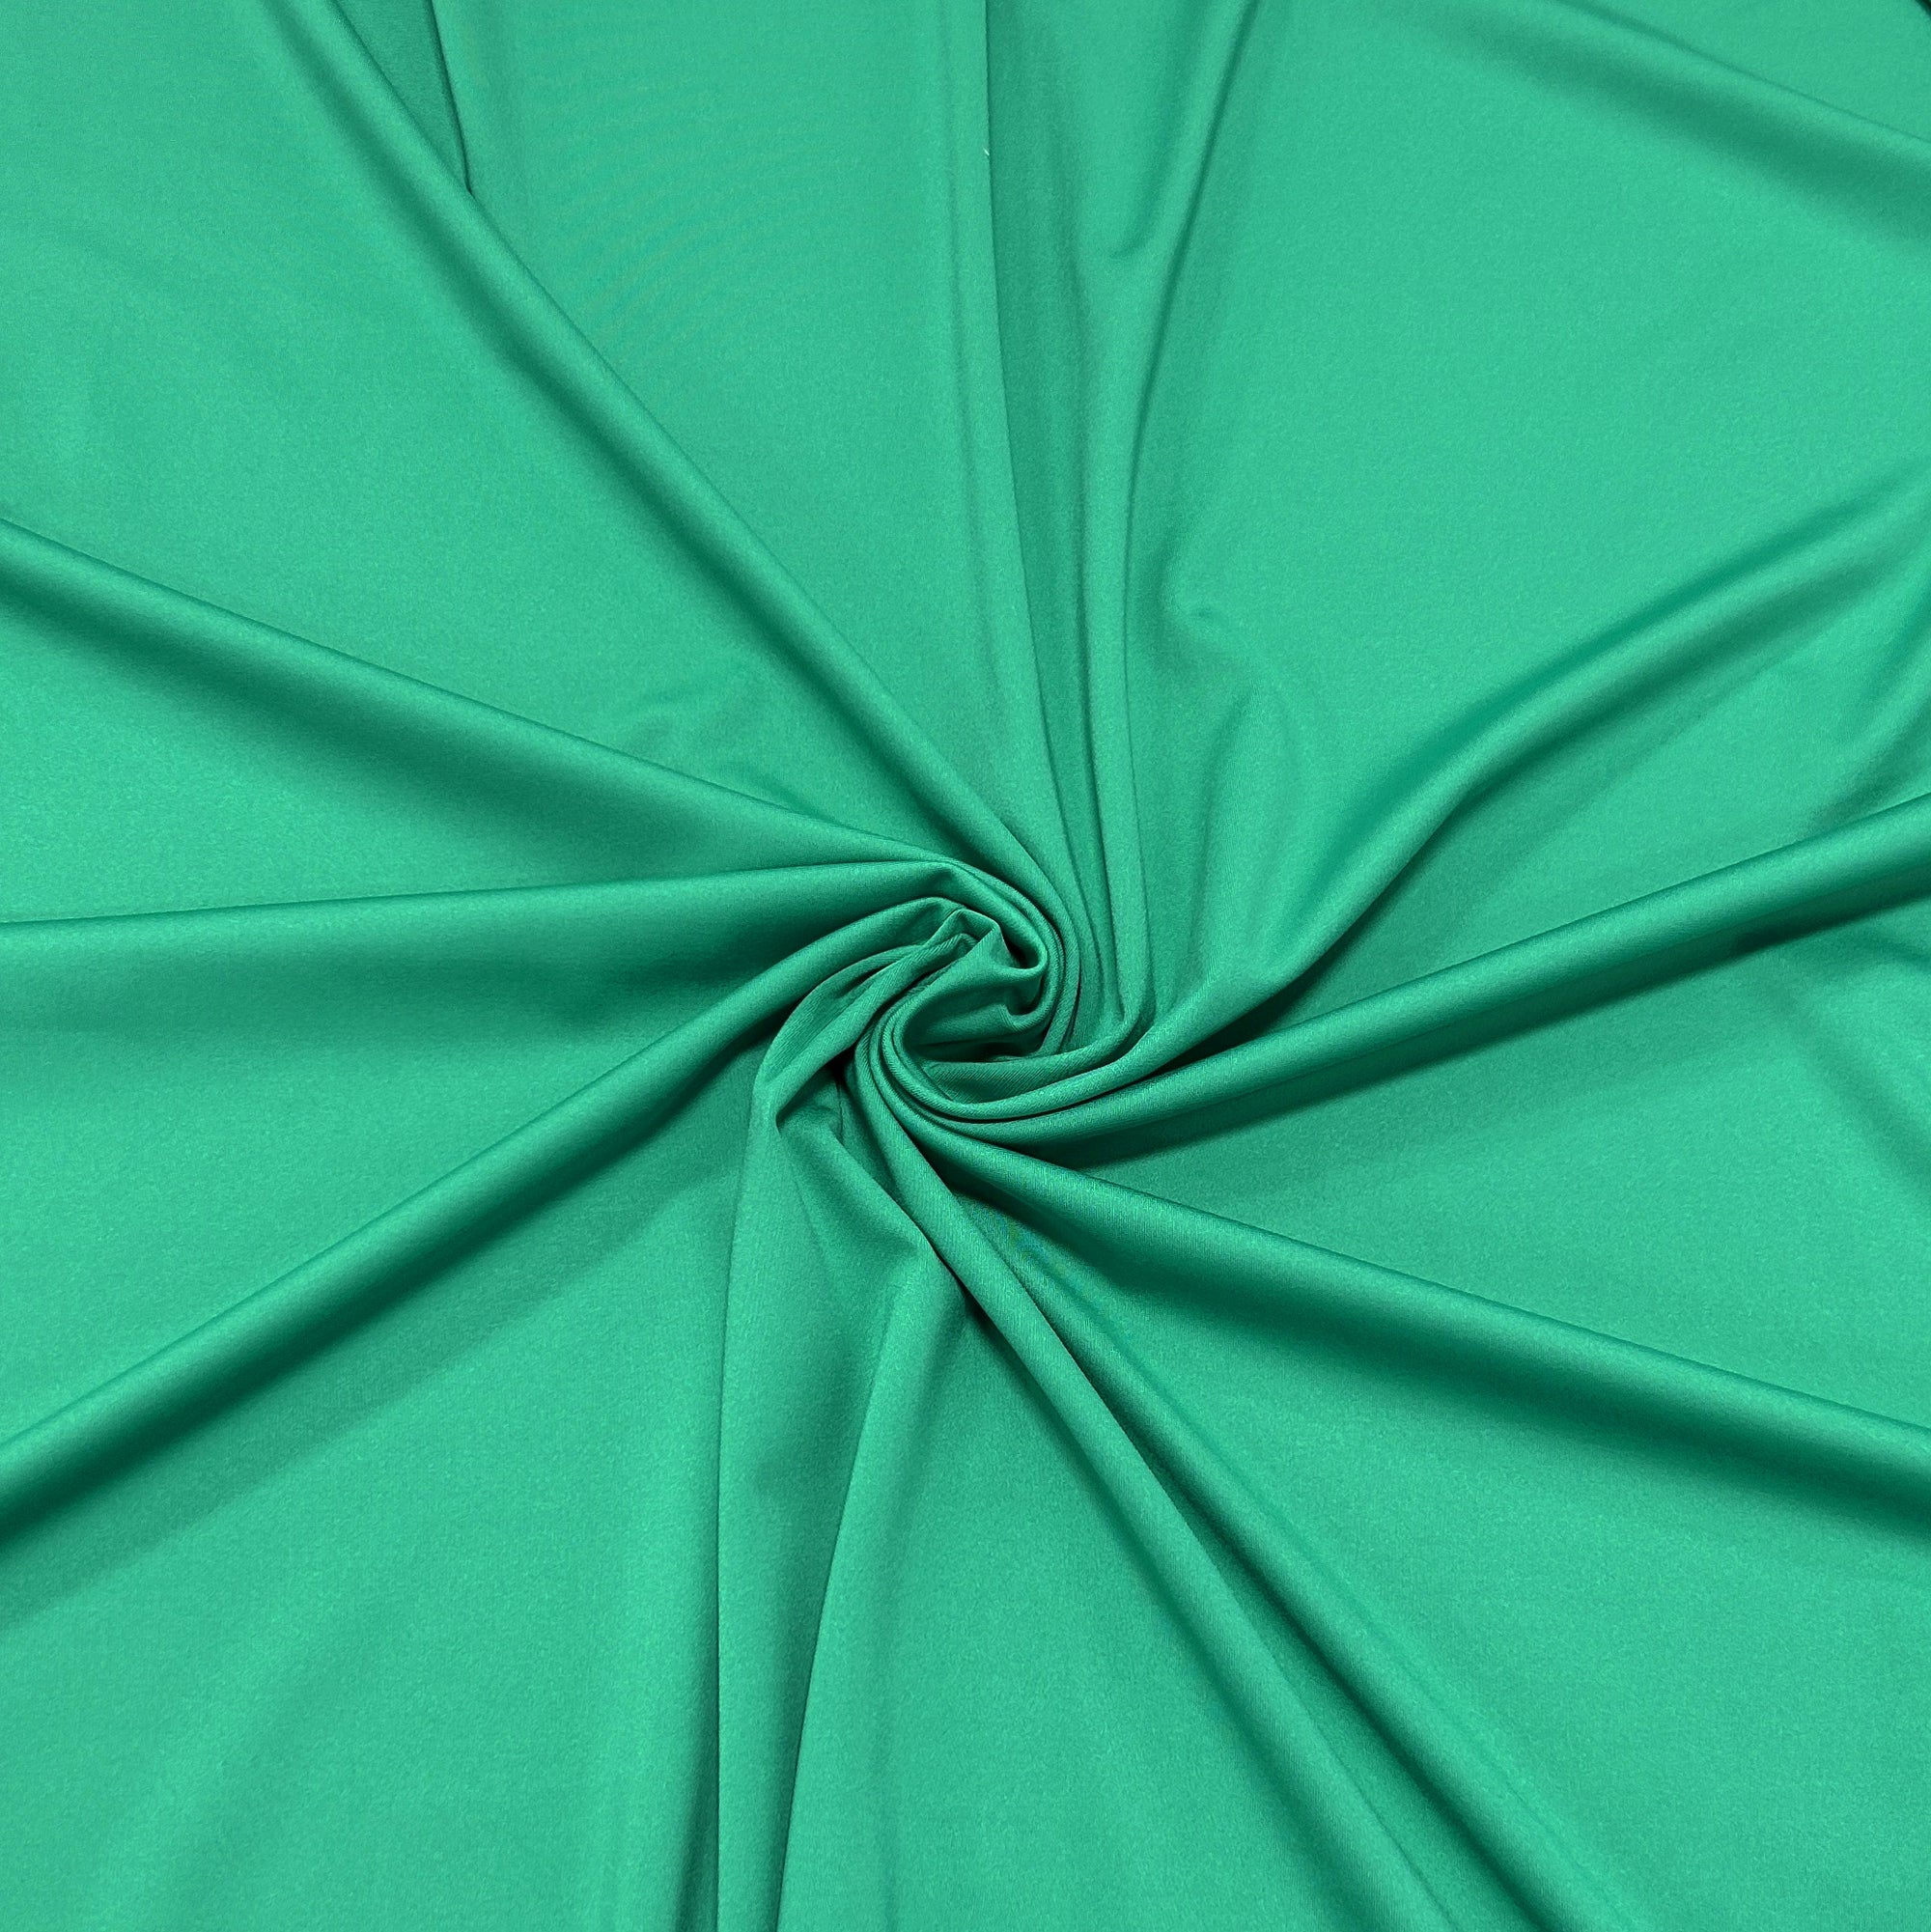 Solid Seafoam Green 4 Way Stretch Moisture Wicking Athletic Performance Knit Fabric